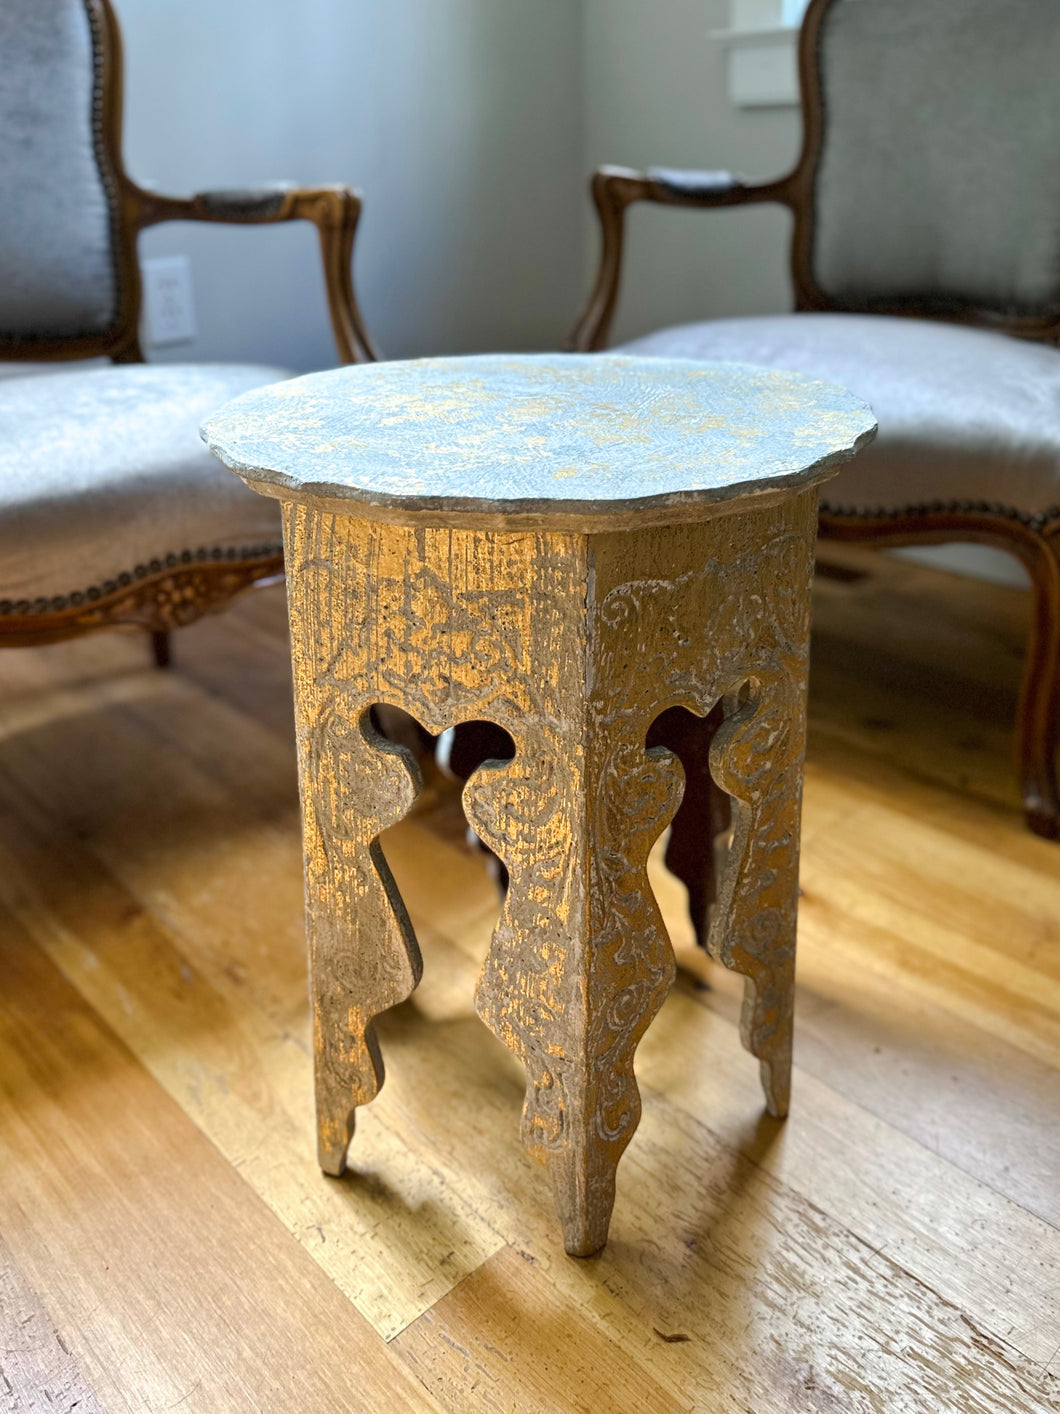 Gilded Antique Paint Finish Workshop - Hexie Table Makeover